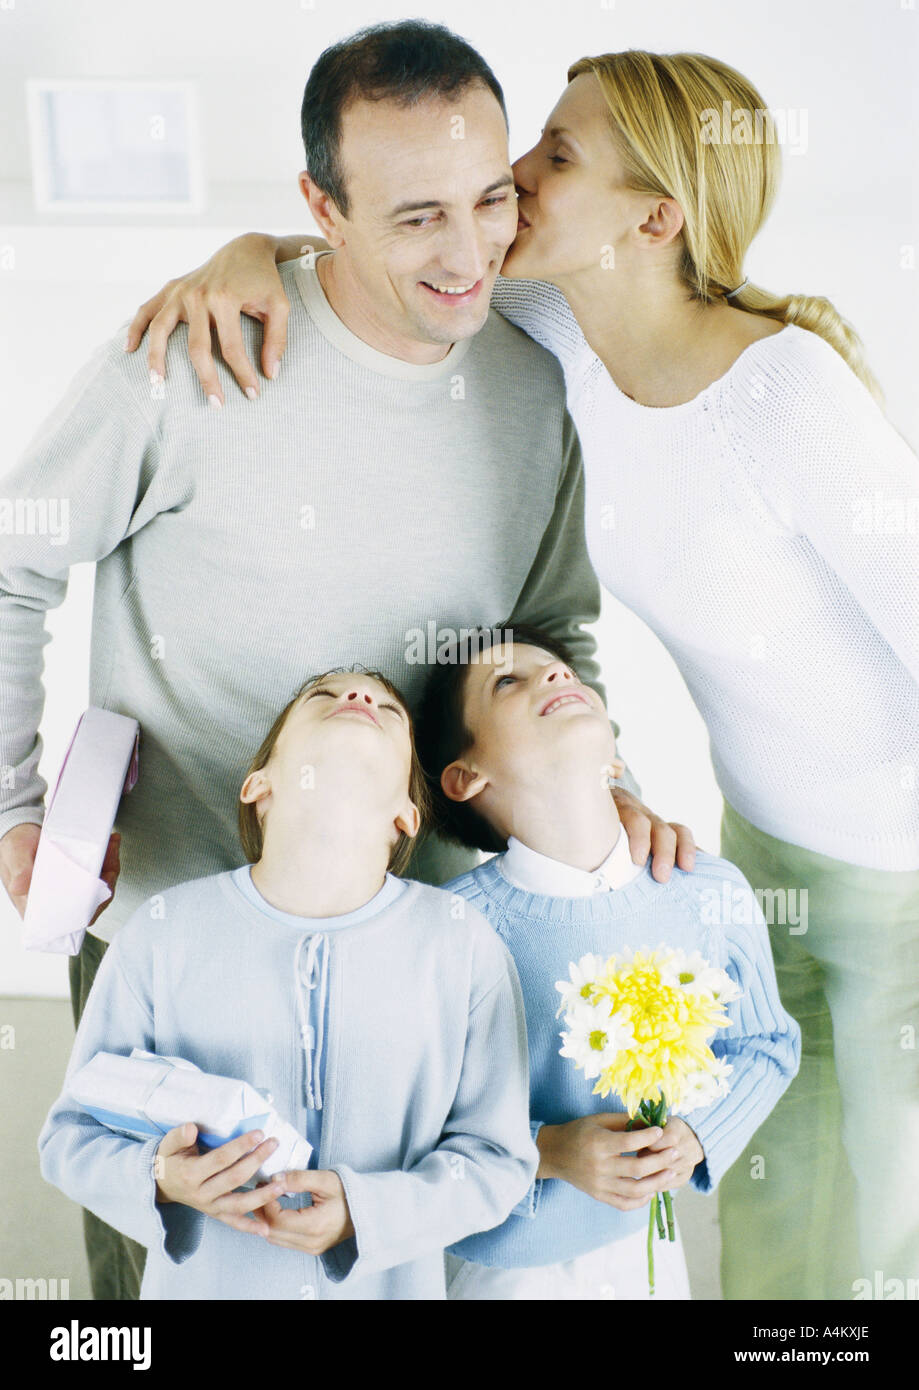 Woman kissing man on cheek, girl and boy looking up with heads back Stock Photo